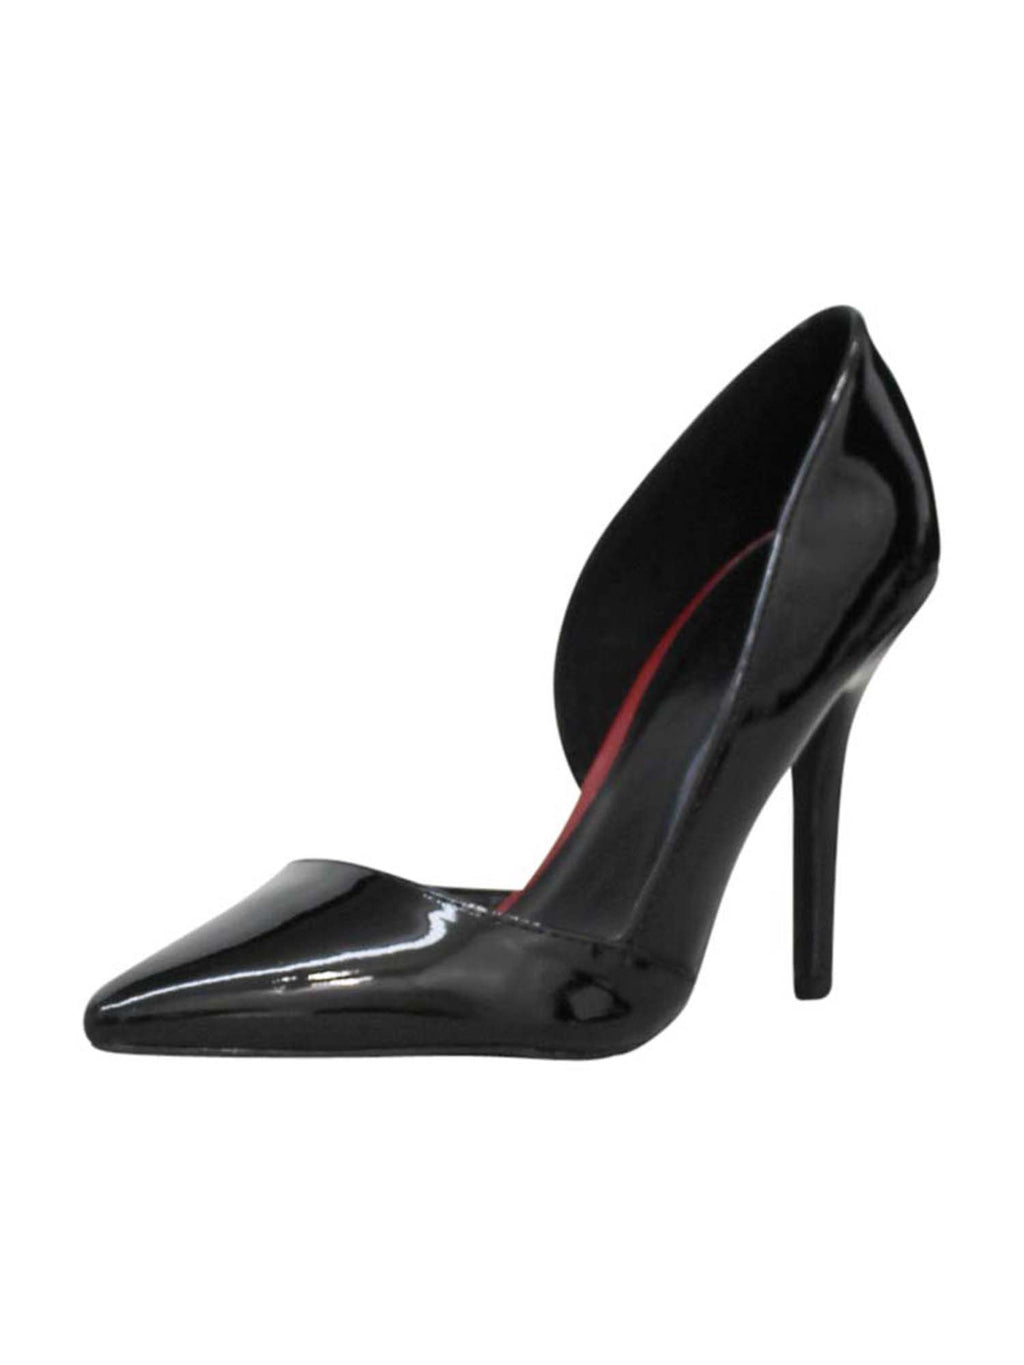 Patent Leather Stiletto Womens High Heel Pumps